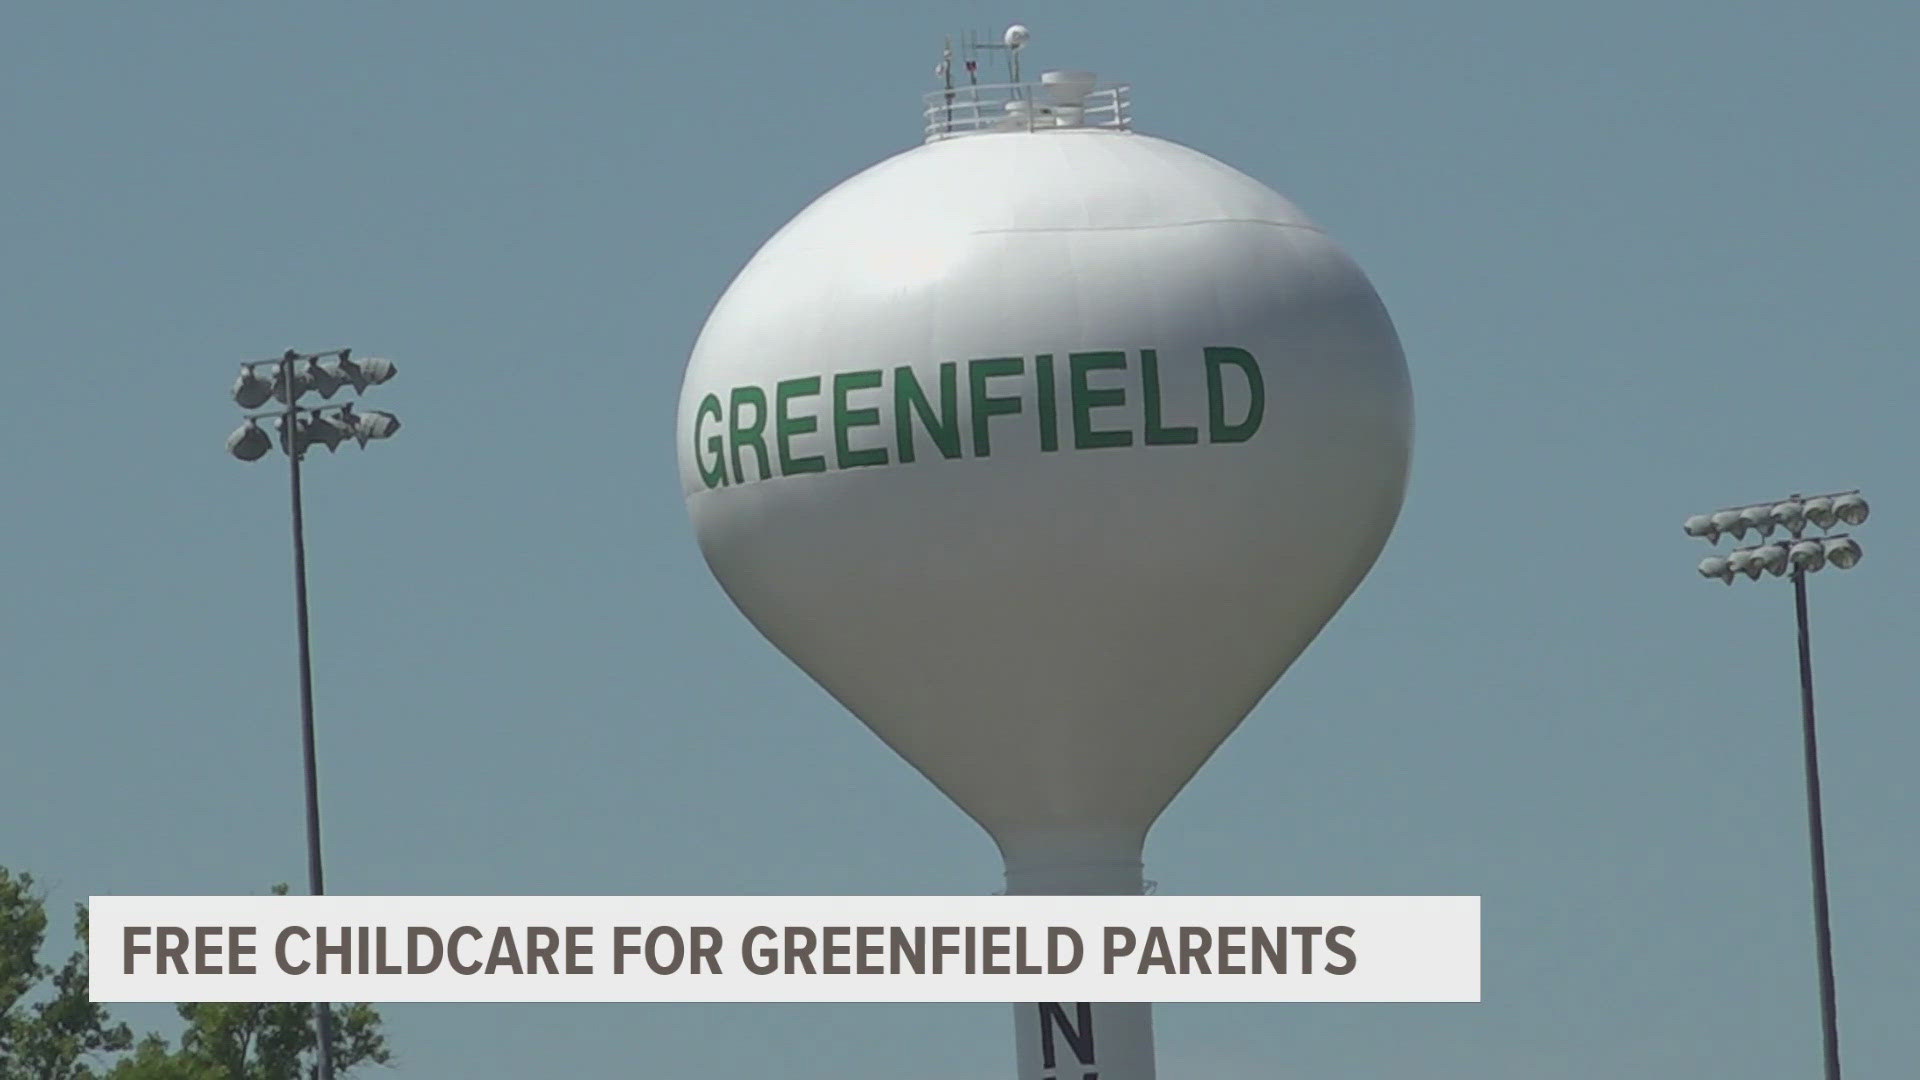 With residents picking up the pieces of Greenfield, an organization is providing free child care to local parents.